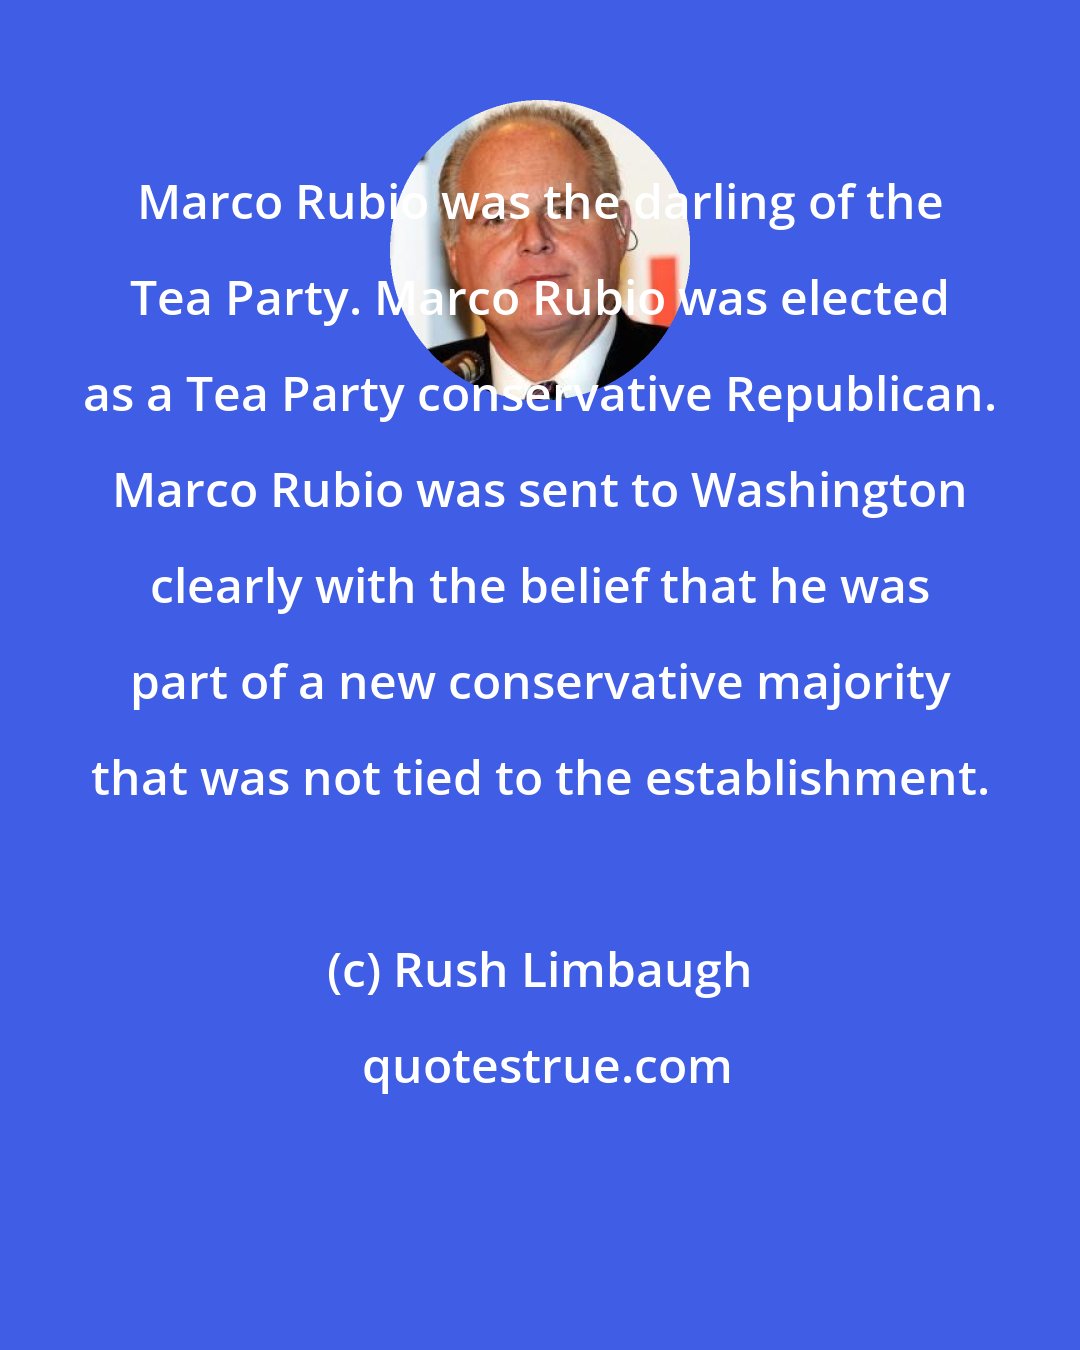 Rush Limbaugh: Marco Rubio was the darling of the Tea Party. Marco Rubio was elected as a Tea Party conservative Republican. Marco Rubio was sent to Washington clearly with the belief that he was part of a new conservative majority that was not tied to the establishment.